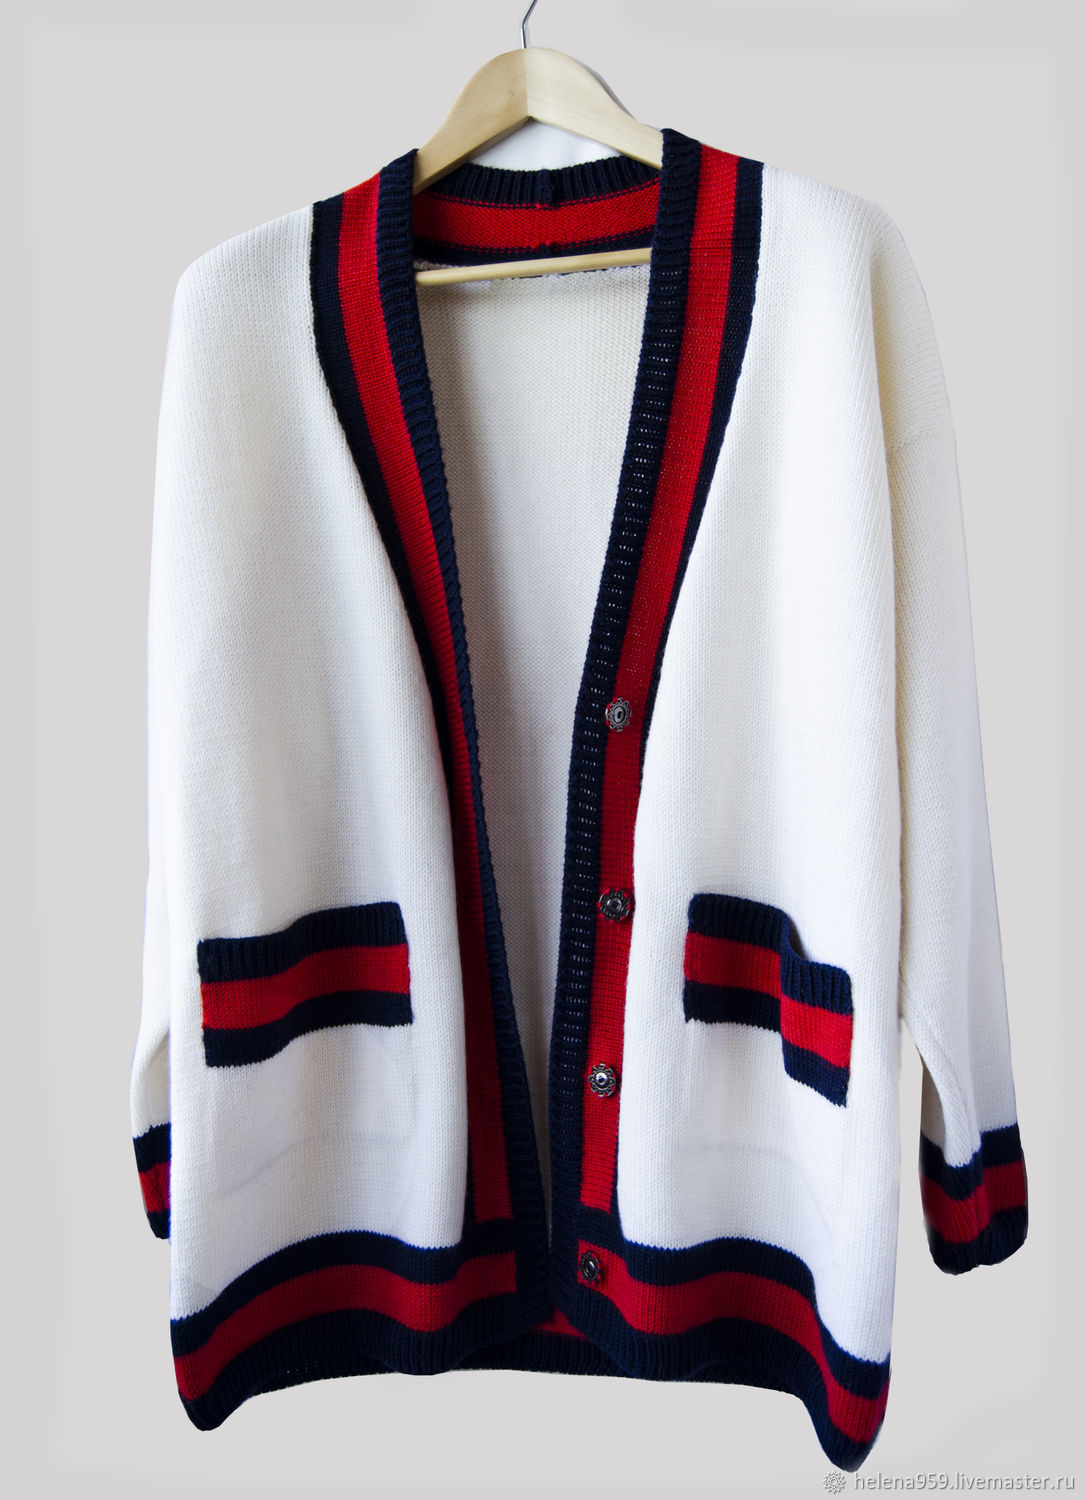 Cardigan knitted in the style of GUCCI 